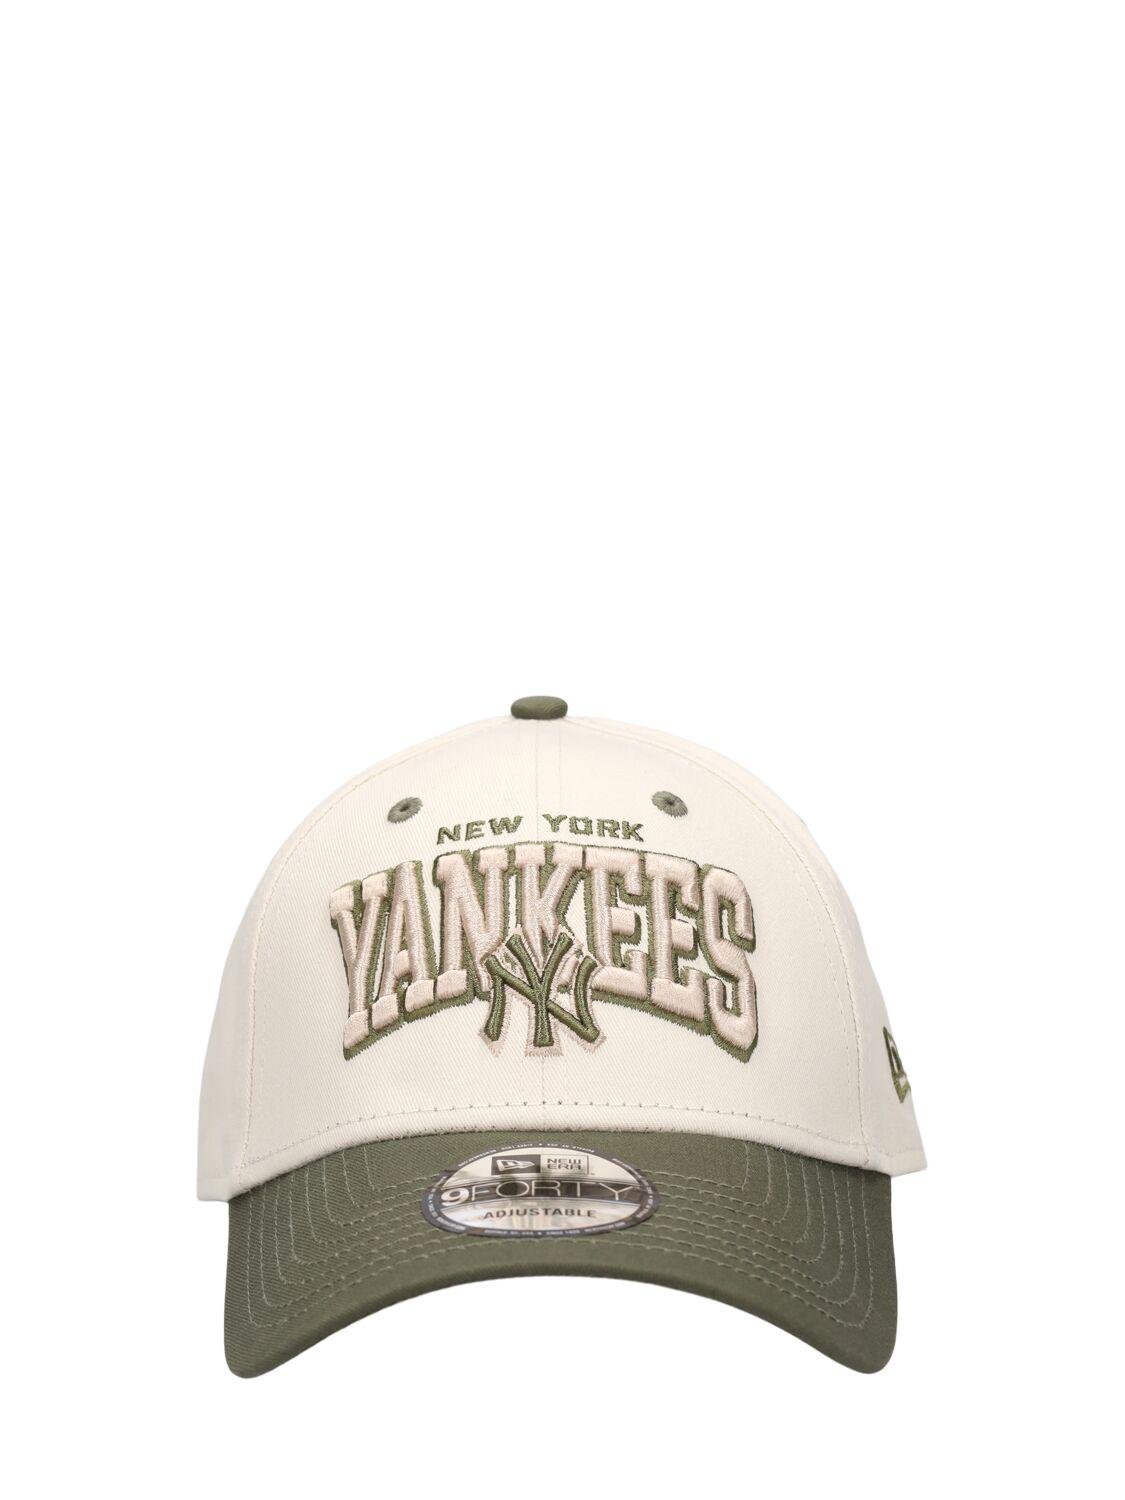 Ny Yankees White Crown 9forty Cap by NEW ERA